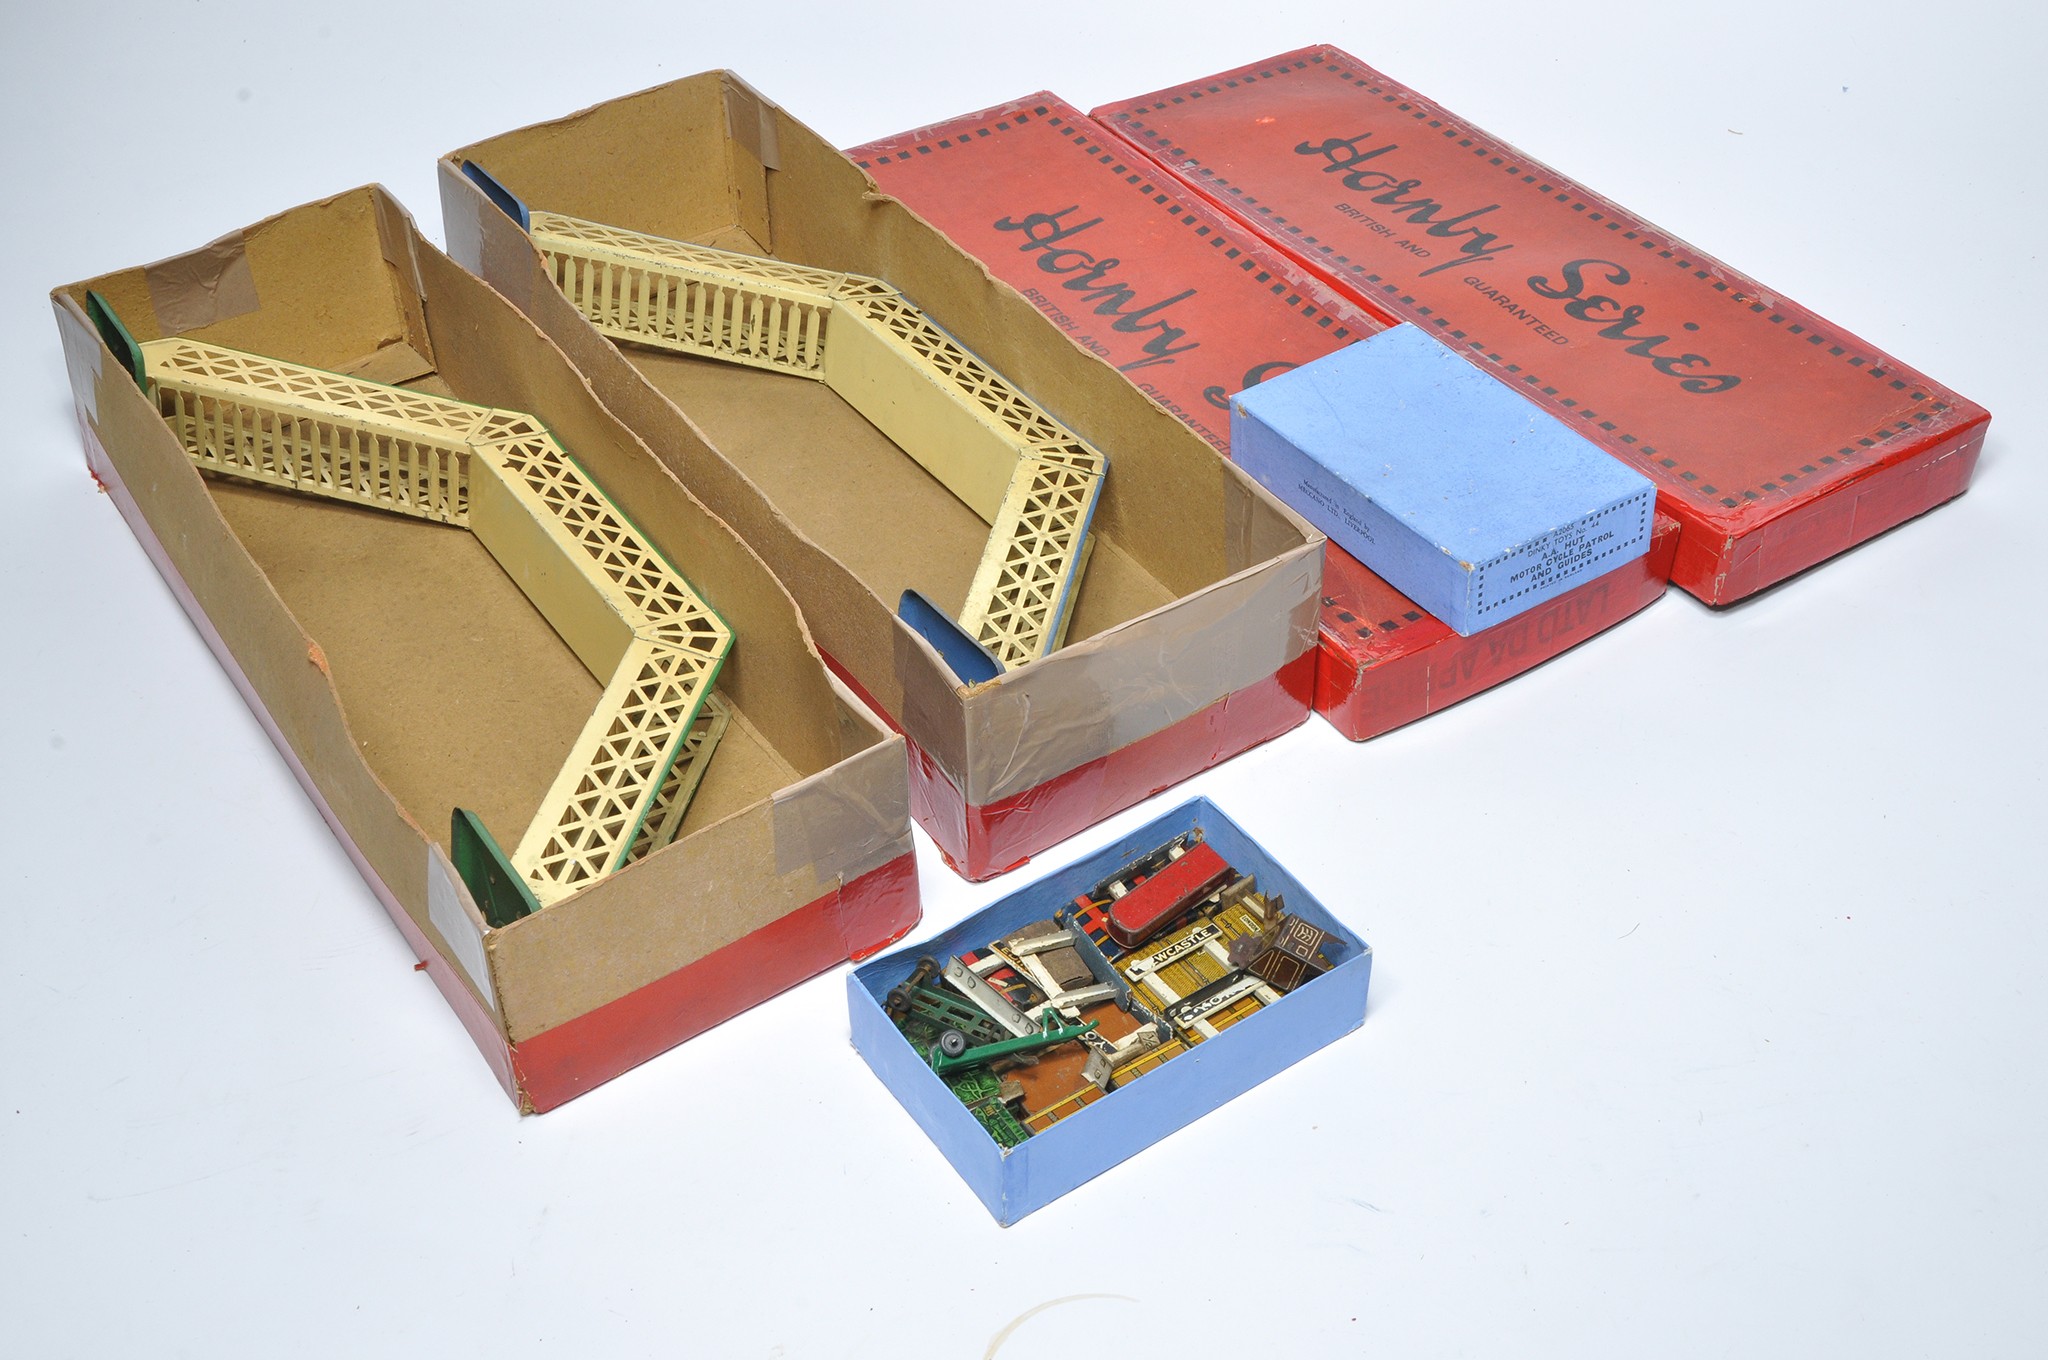 Hornby O Gauge Model Railway comprising duo of footbridges plus loose accessory items contained in